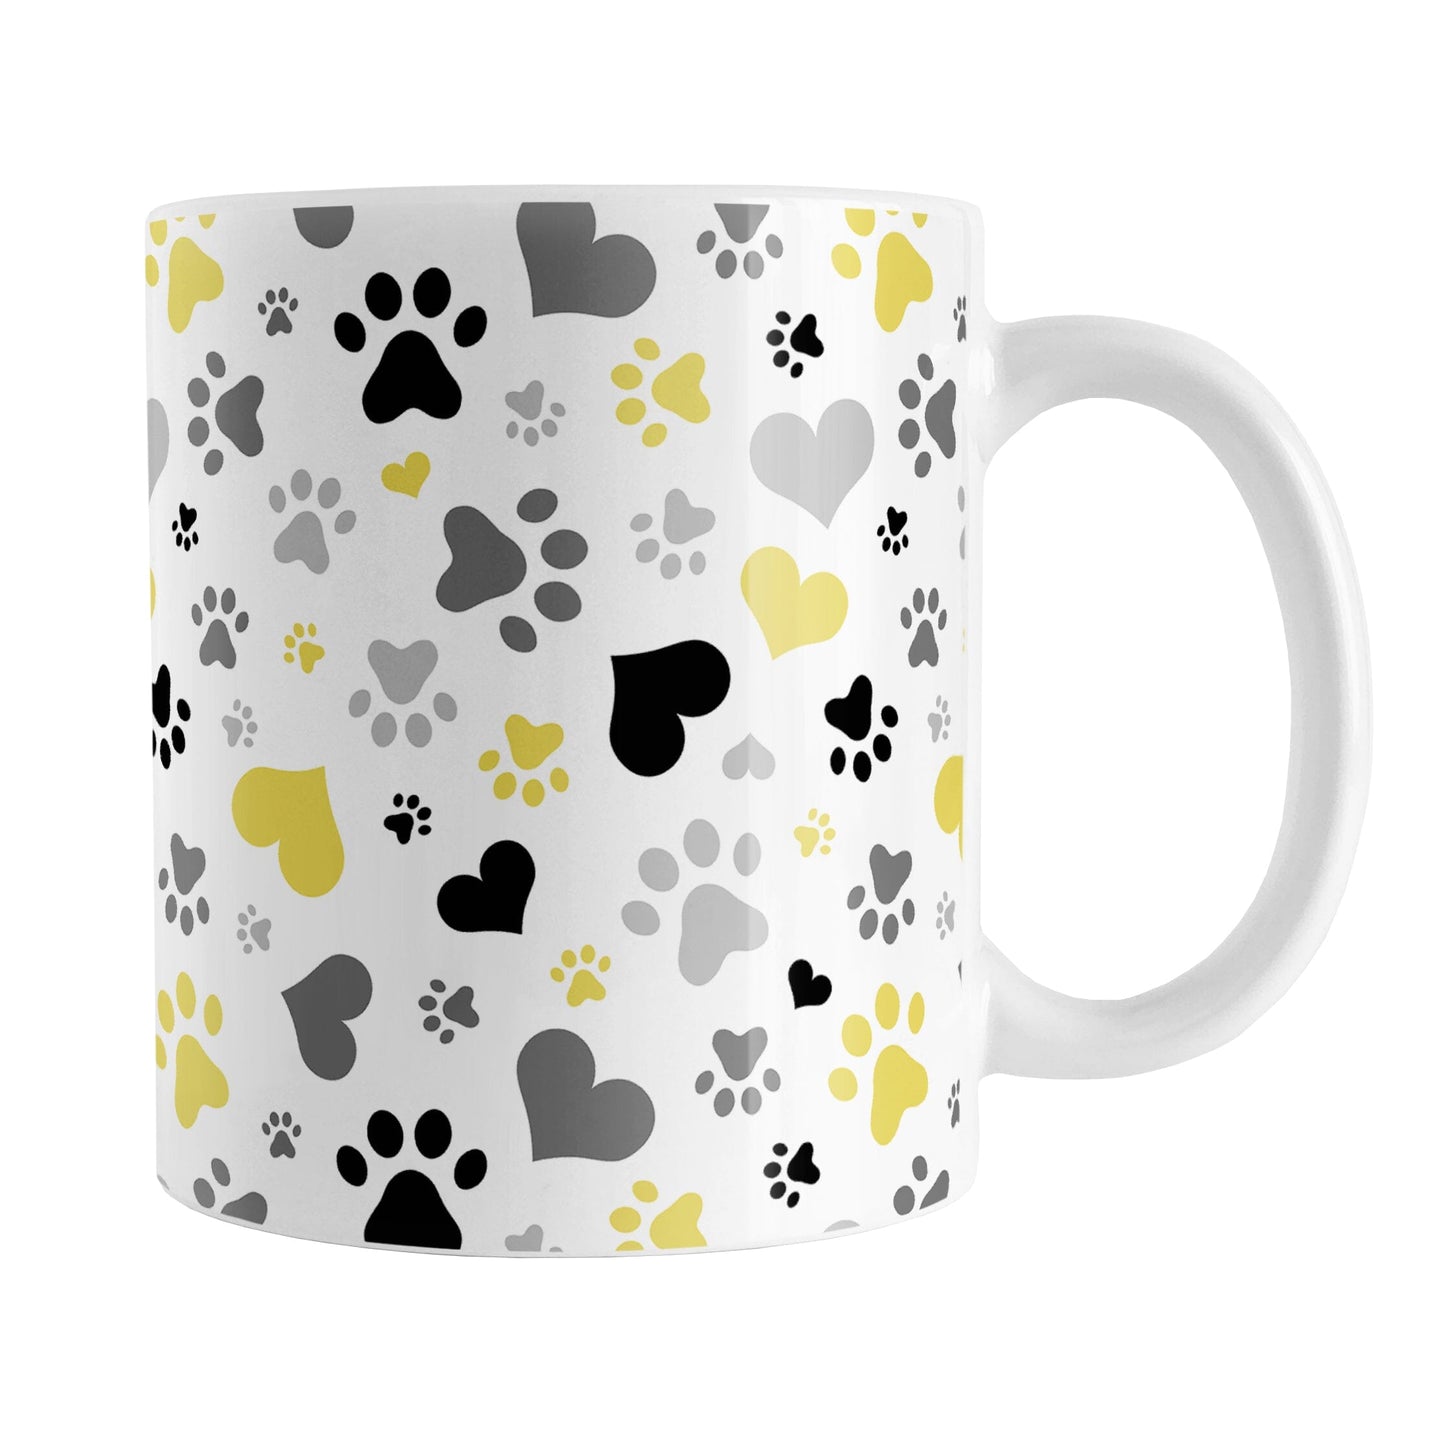 Black and Yellow Hearts and Paw Prints Mug (11oz) at Amy's Coffee Mugs. A ceramic coffee mug designed with a pattern of hearts and paw prints in red and different shades of black and gray that wraps around the mug to the handle. This mug is perfect for people love dogs and cute paw print designs.